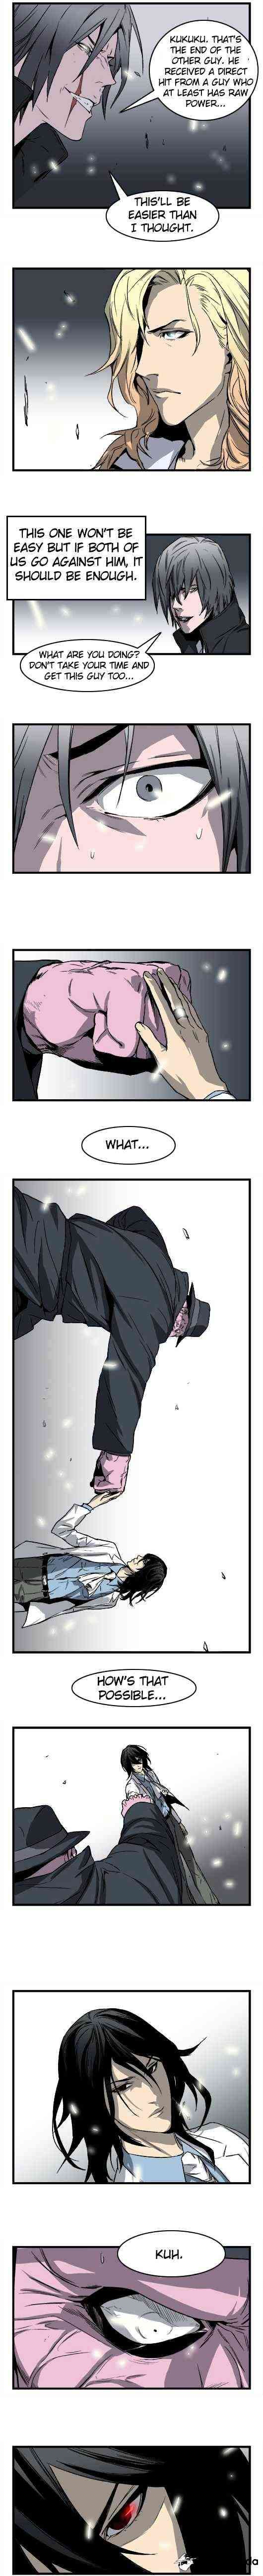 Noblesse Chapter 32 page 3